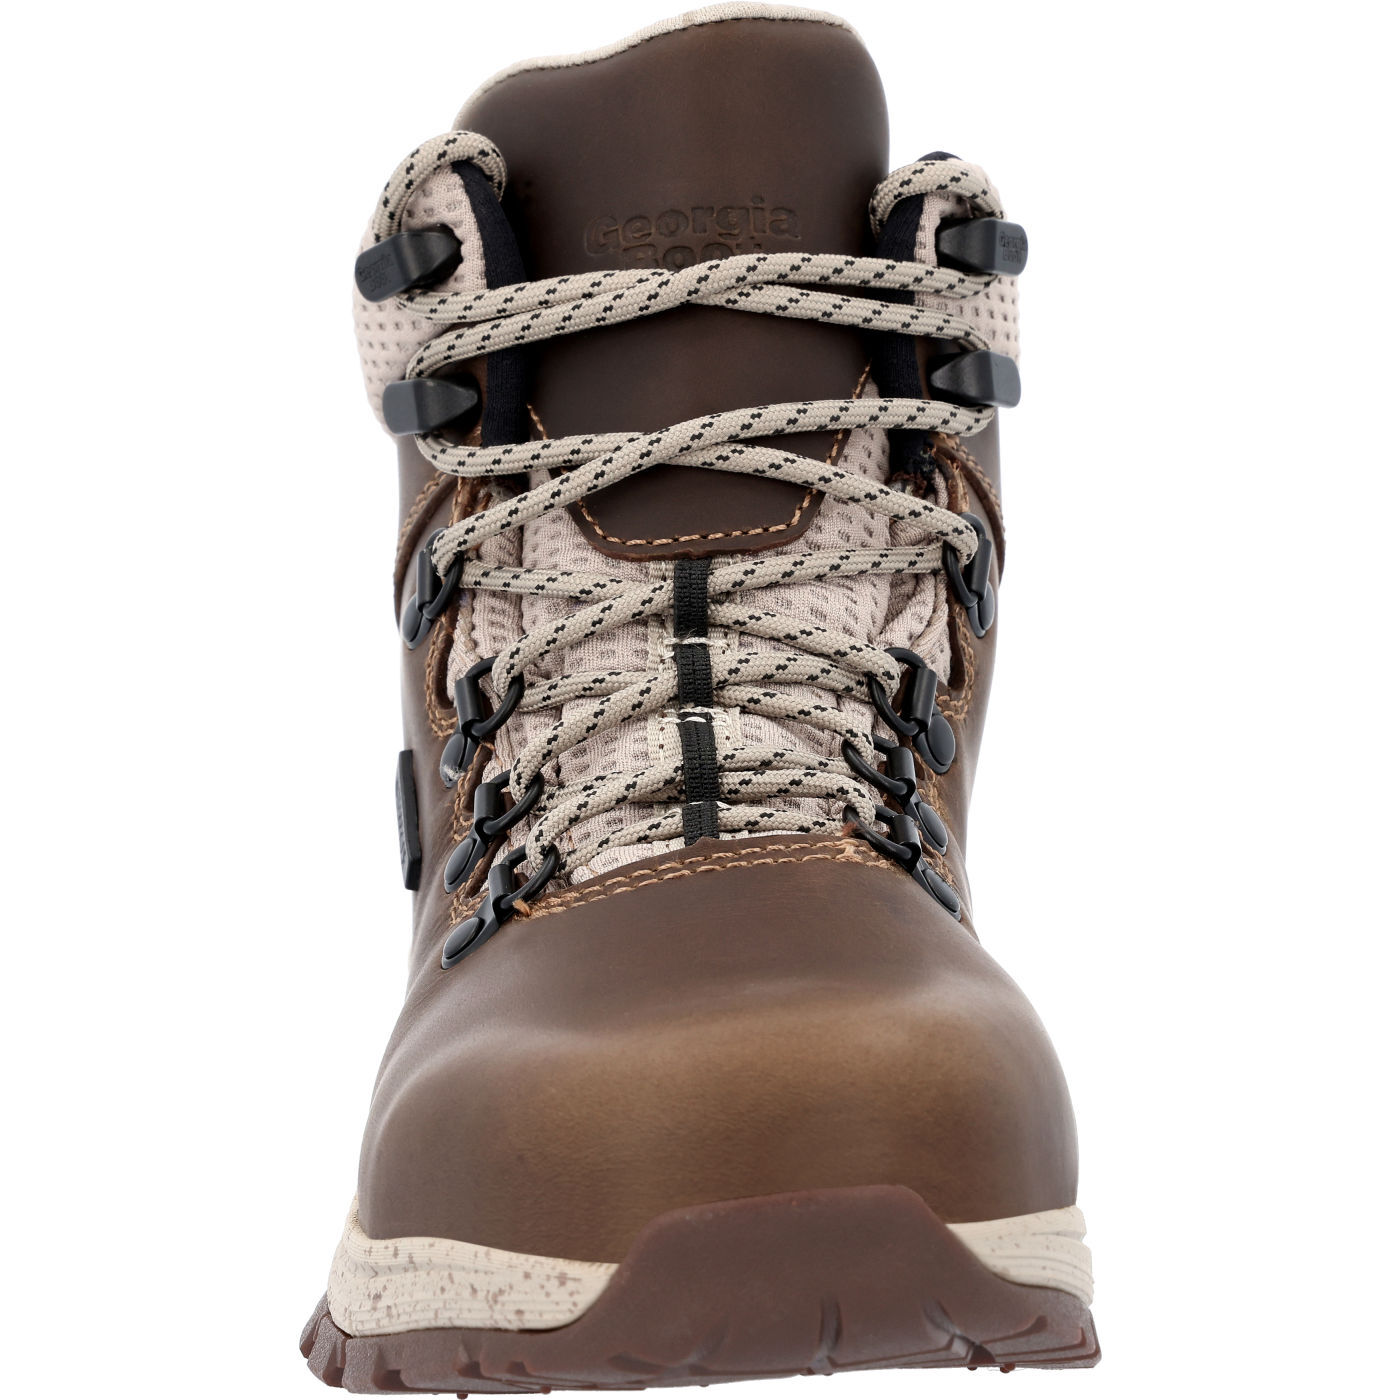 Georgia Boot Eagle Trail Women's Alloy Toe Waterproof Hiker Boots from GME Supply